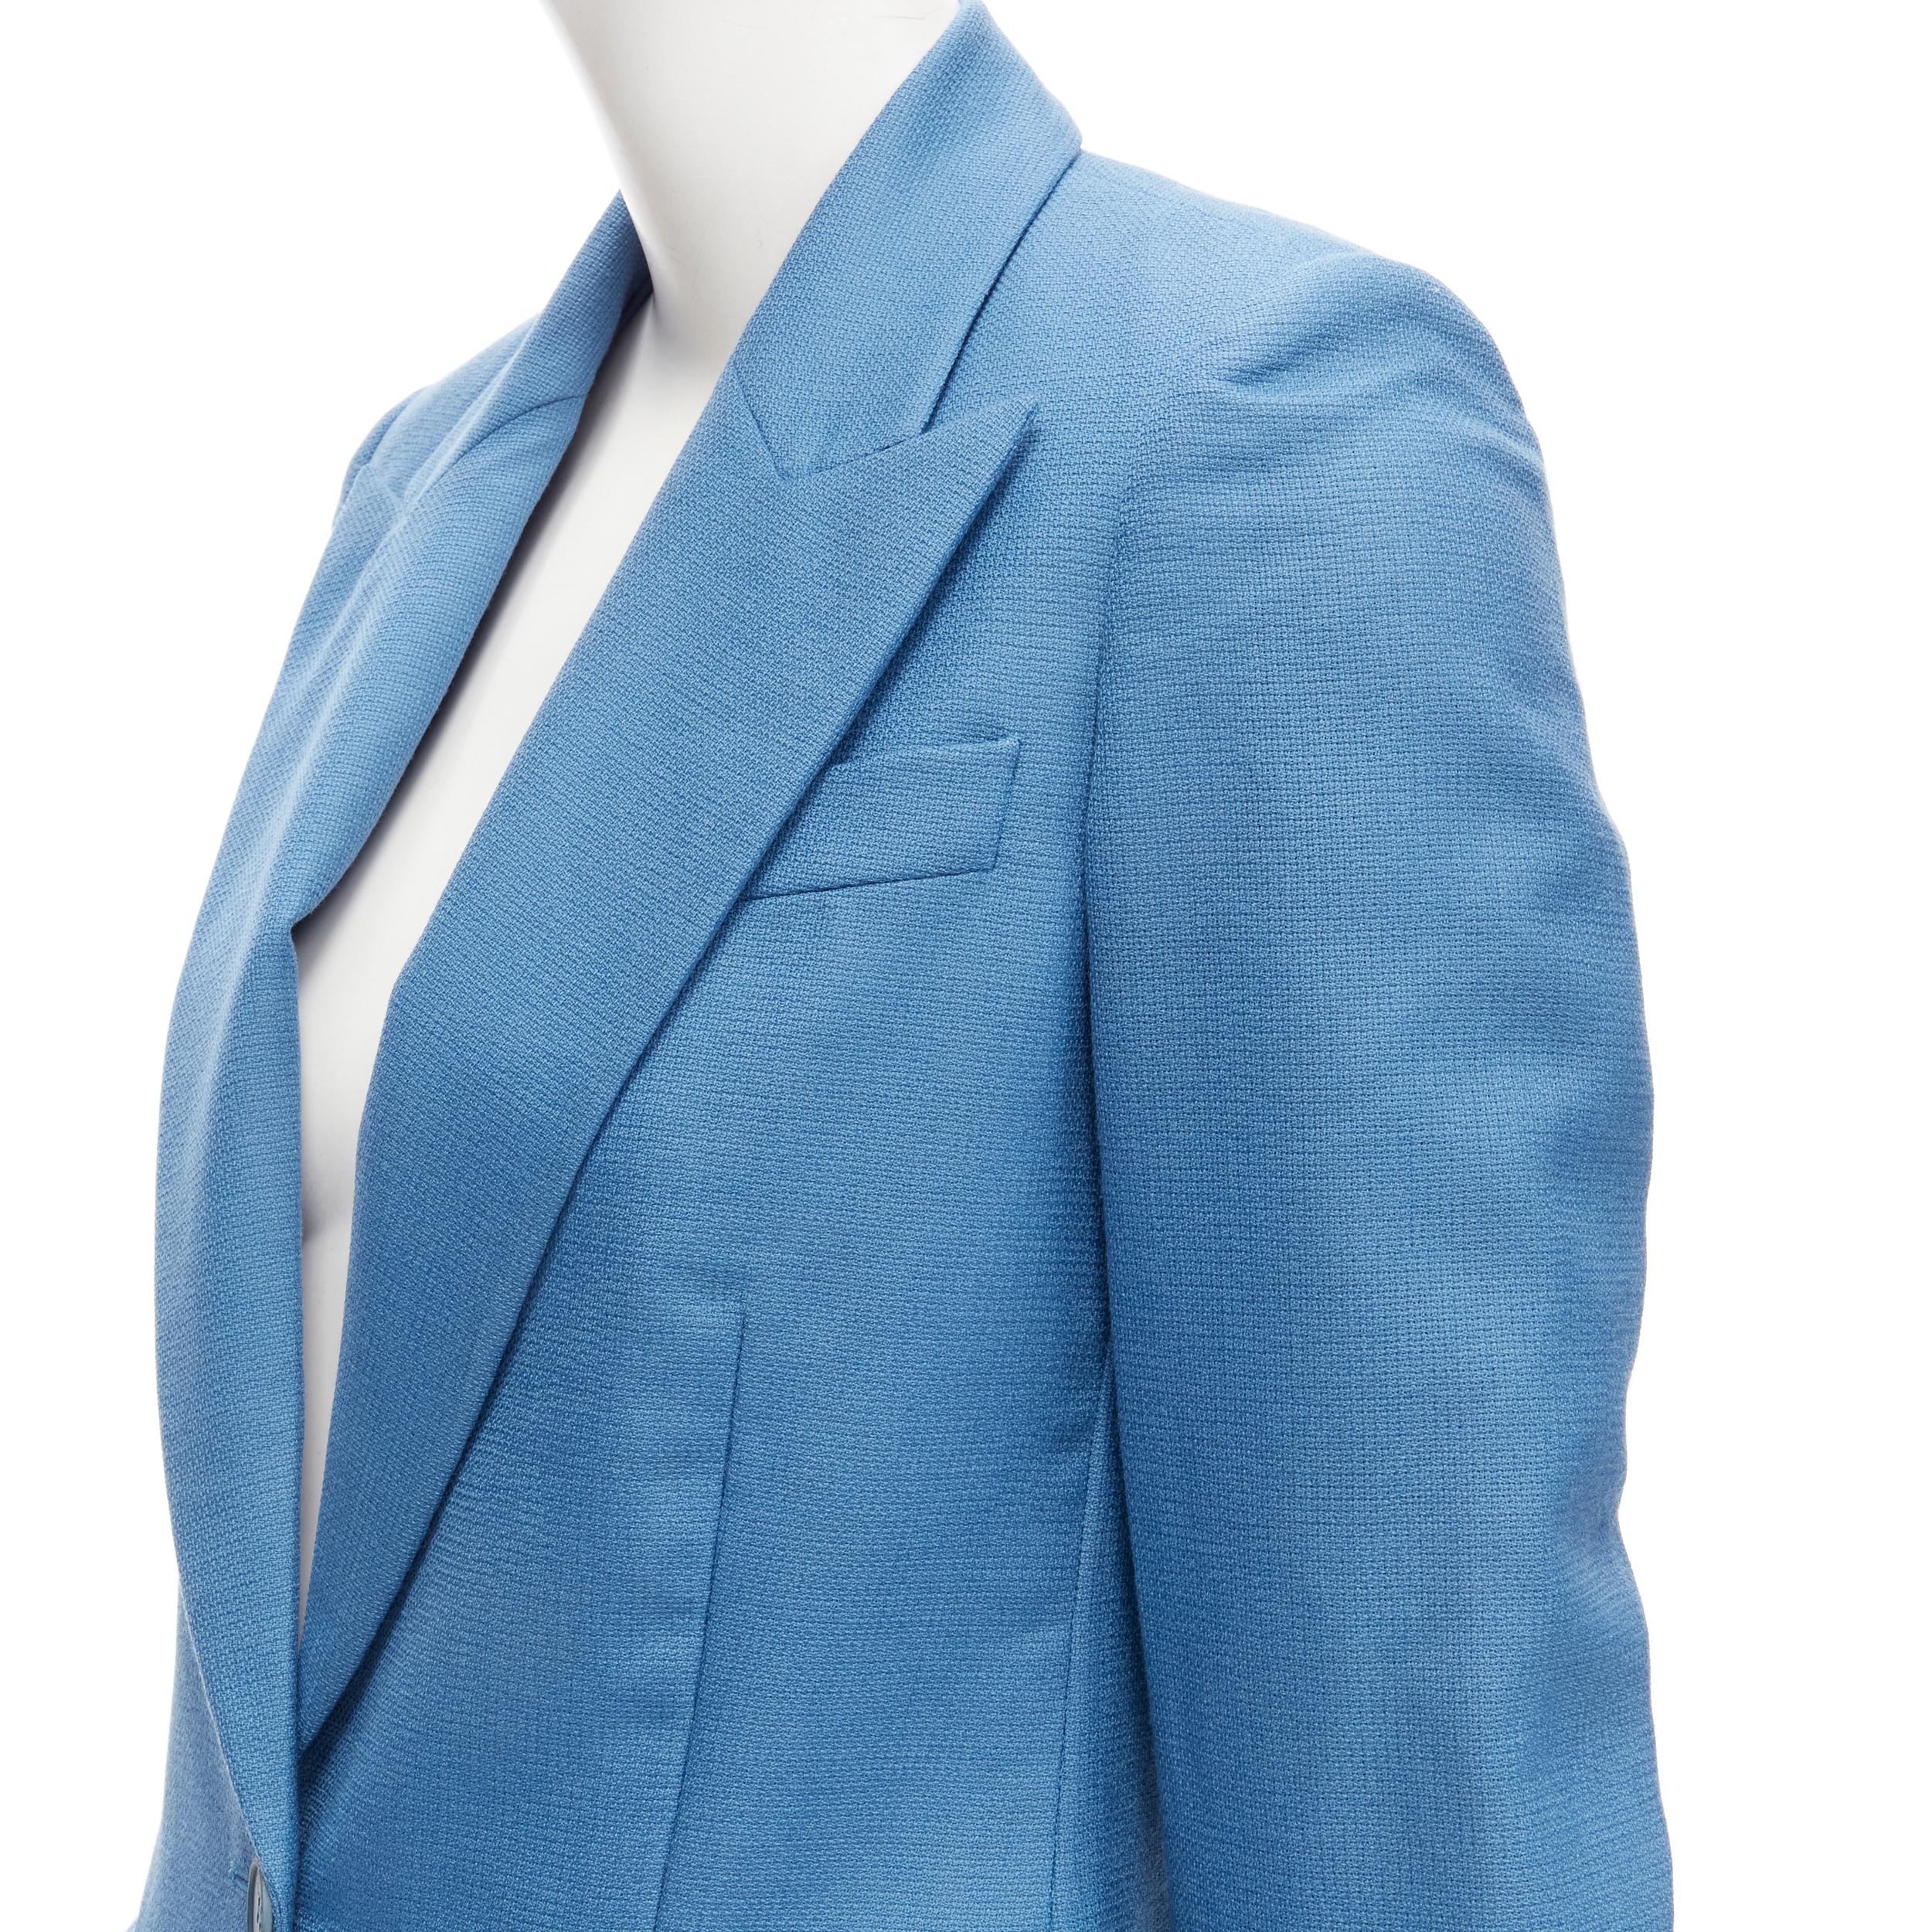 STELLA MCCARTNEY 2010 blue 100% wool rubberised buttons blazer jacket IT36 XXS
Reference: YNWG/A00161
Brand: Stella McCartney
Designer: Stella McCartney
Collection: 2010
Material: Wool
Color: Blue
Pattern: Solid
Closure: Button
Lining: Fabric
Extra